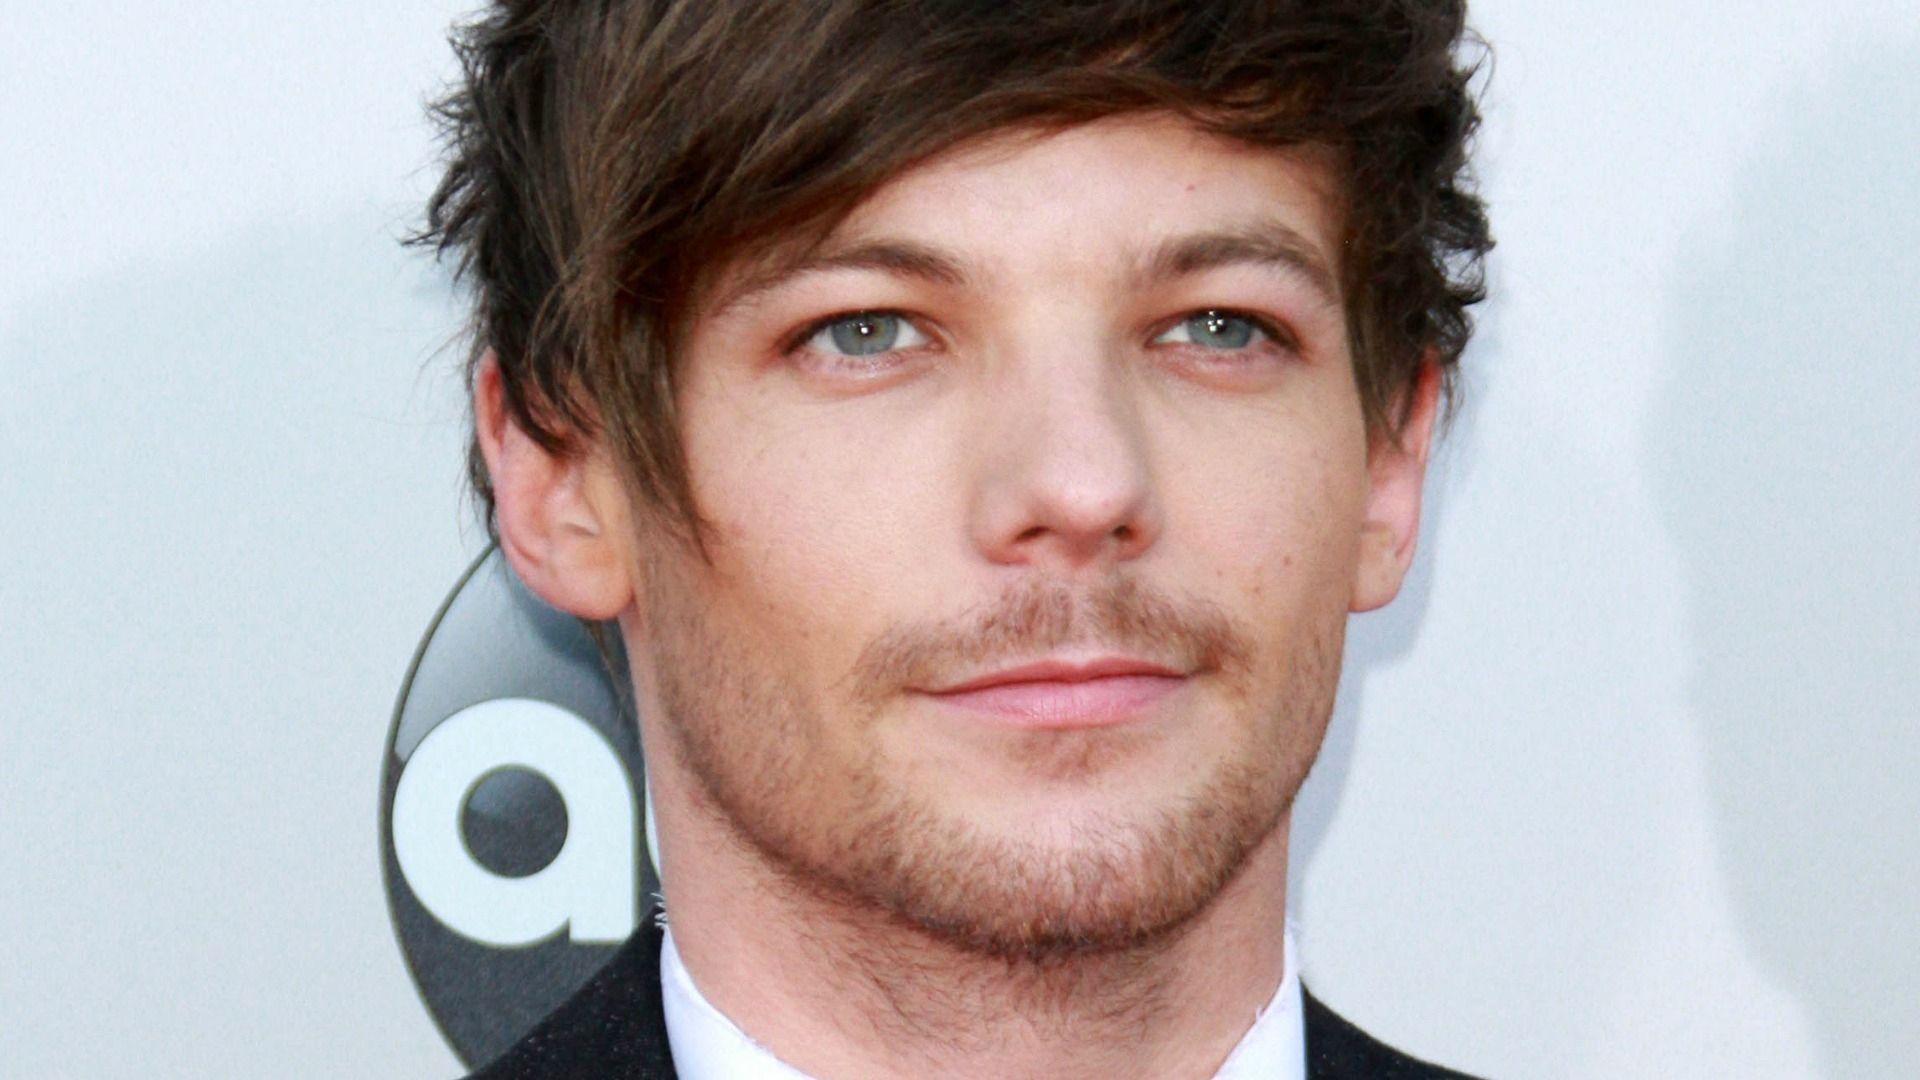 Louis Tomlinson Wallpaper Image Photo Picture Background